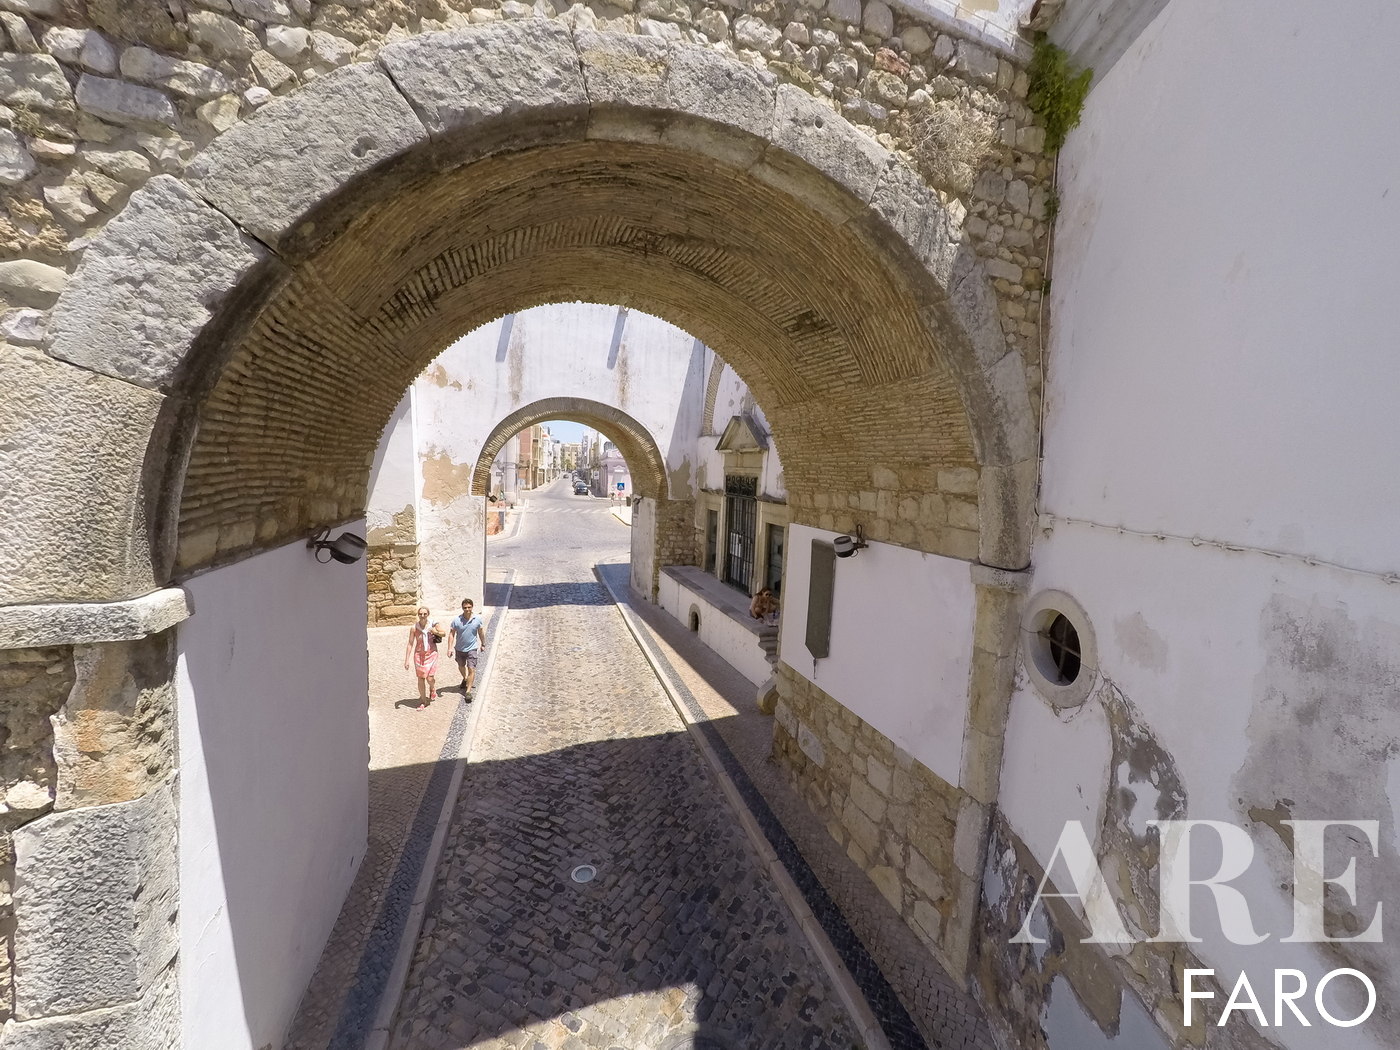 Arches of the old town of Faro. Here we can enter the city and walk through the old town. There are several restaurants and service areas